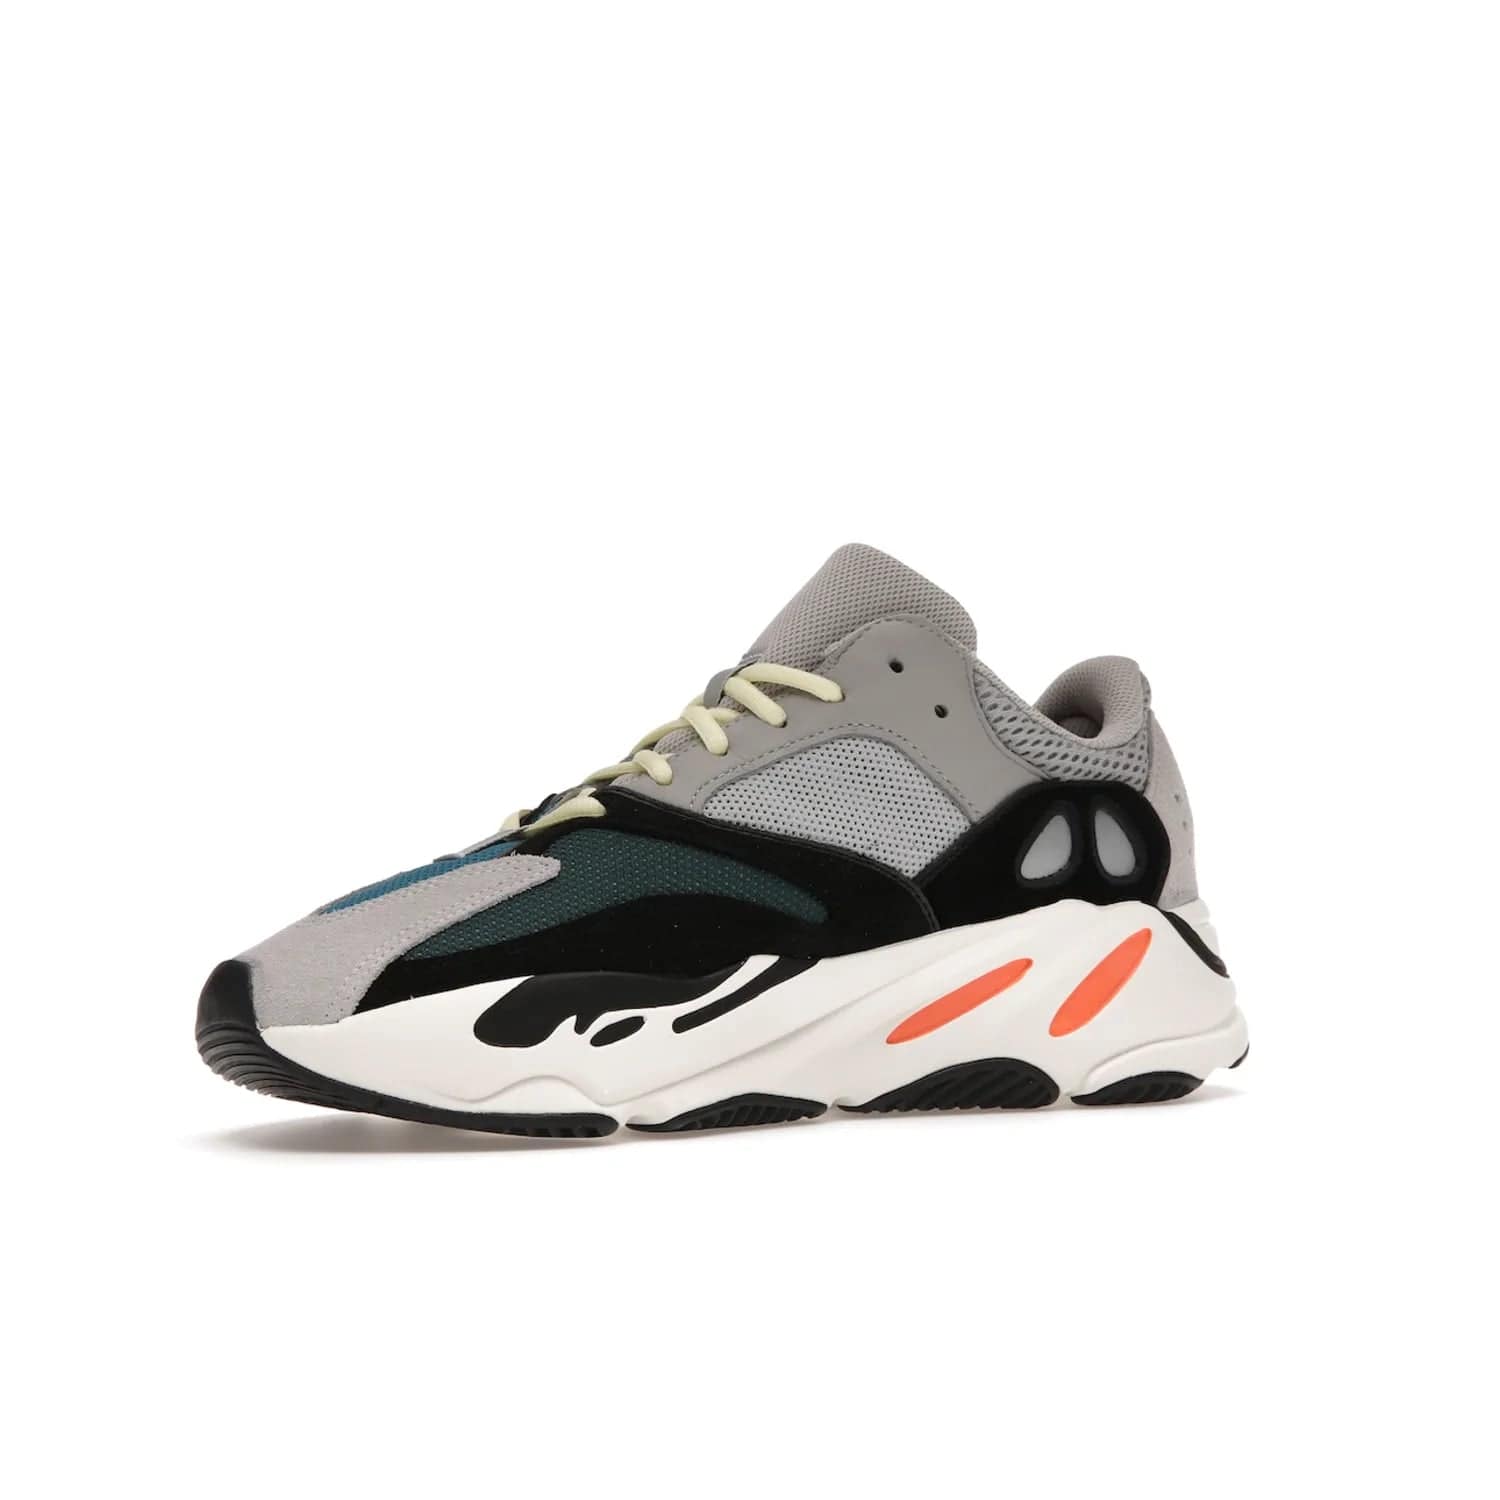 adidas Yeezy Boost 700 Wave Runner - Image 16 - Only at www.BallersClubKickz.com - Shop the iconic adidas Yeezy Boost 700 Wave Runner. Featuring grey mesh and leather upper, black suede overlays, teal mesh underlays, and signature Boost sole. Be bold & make a statement.